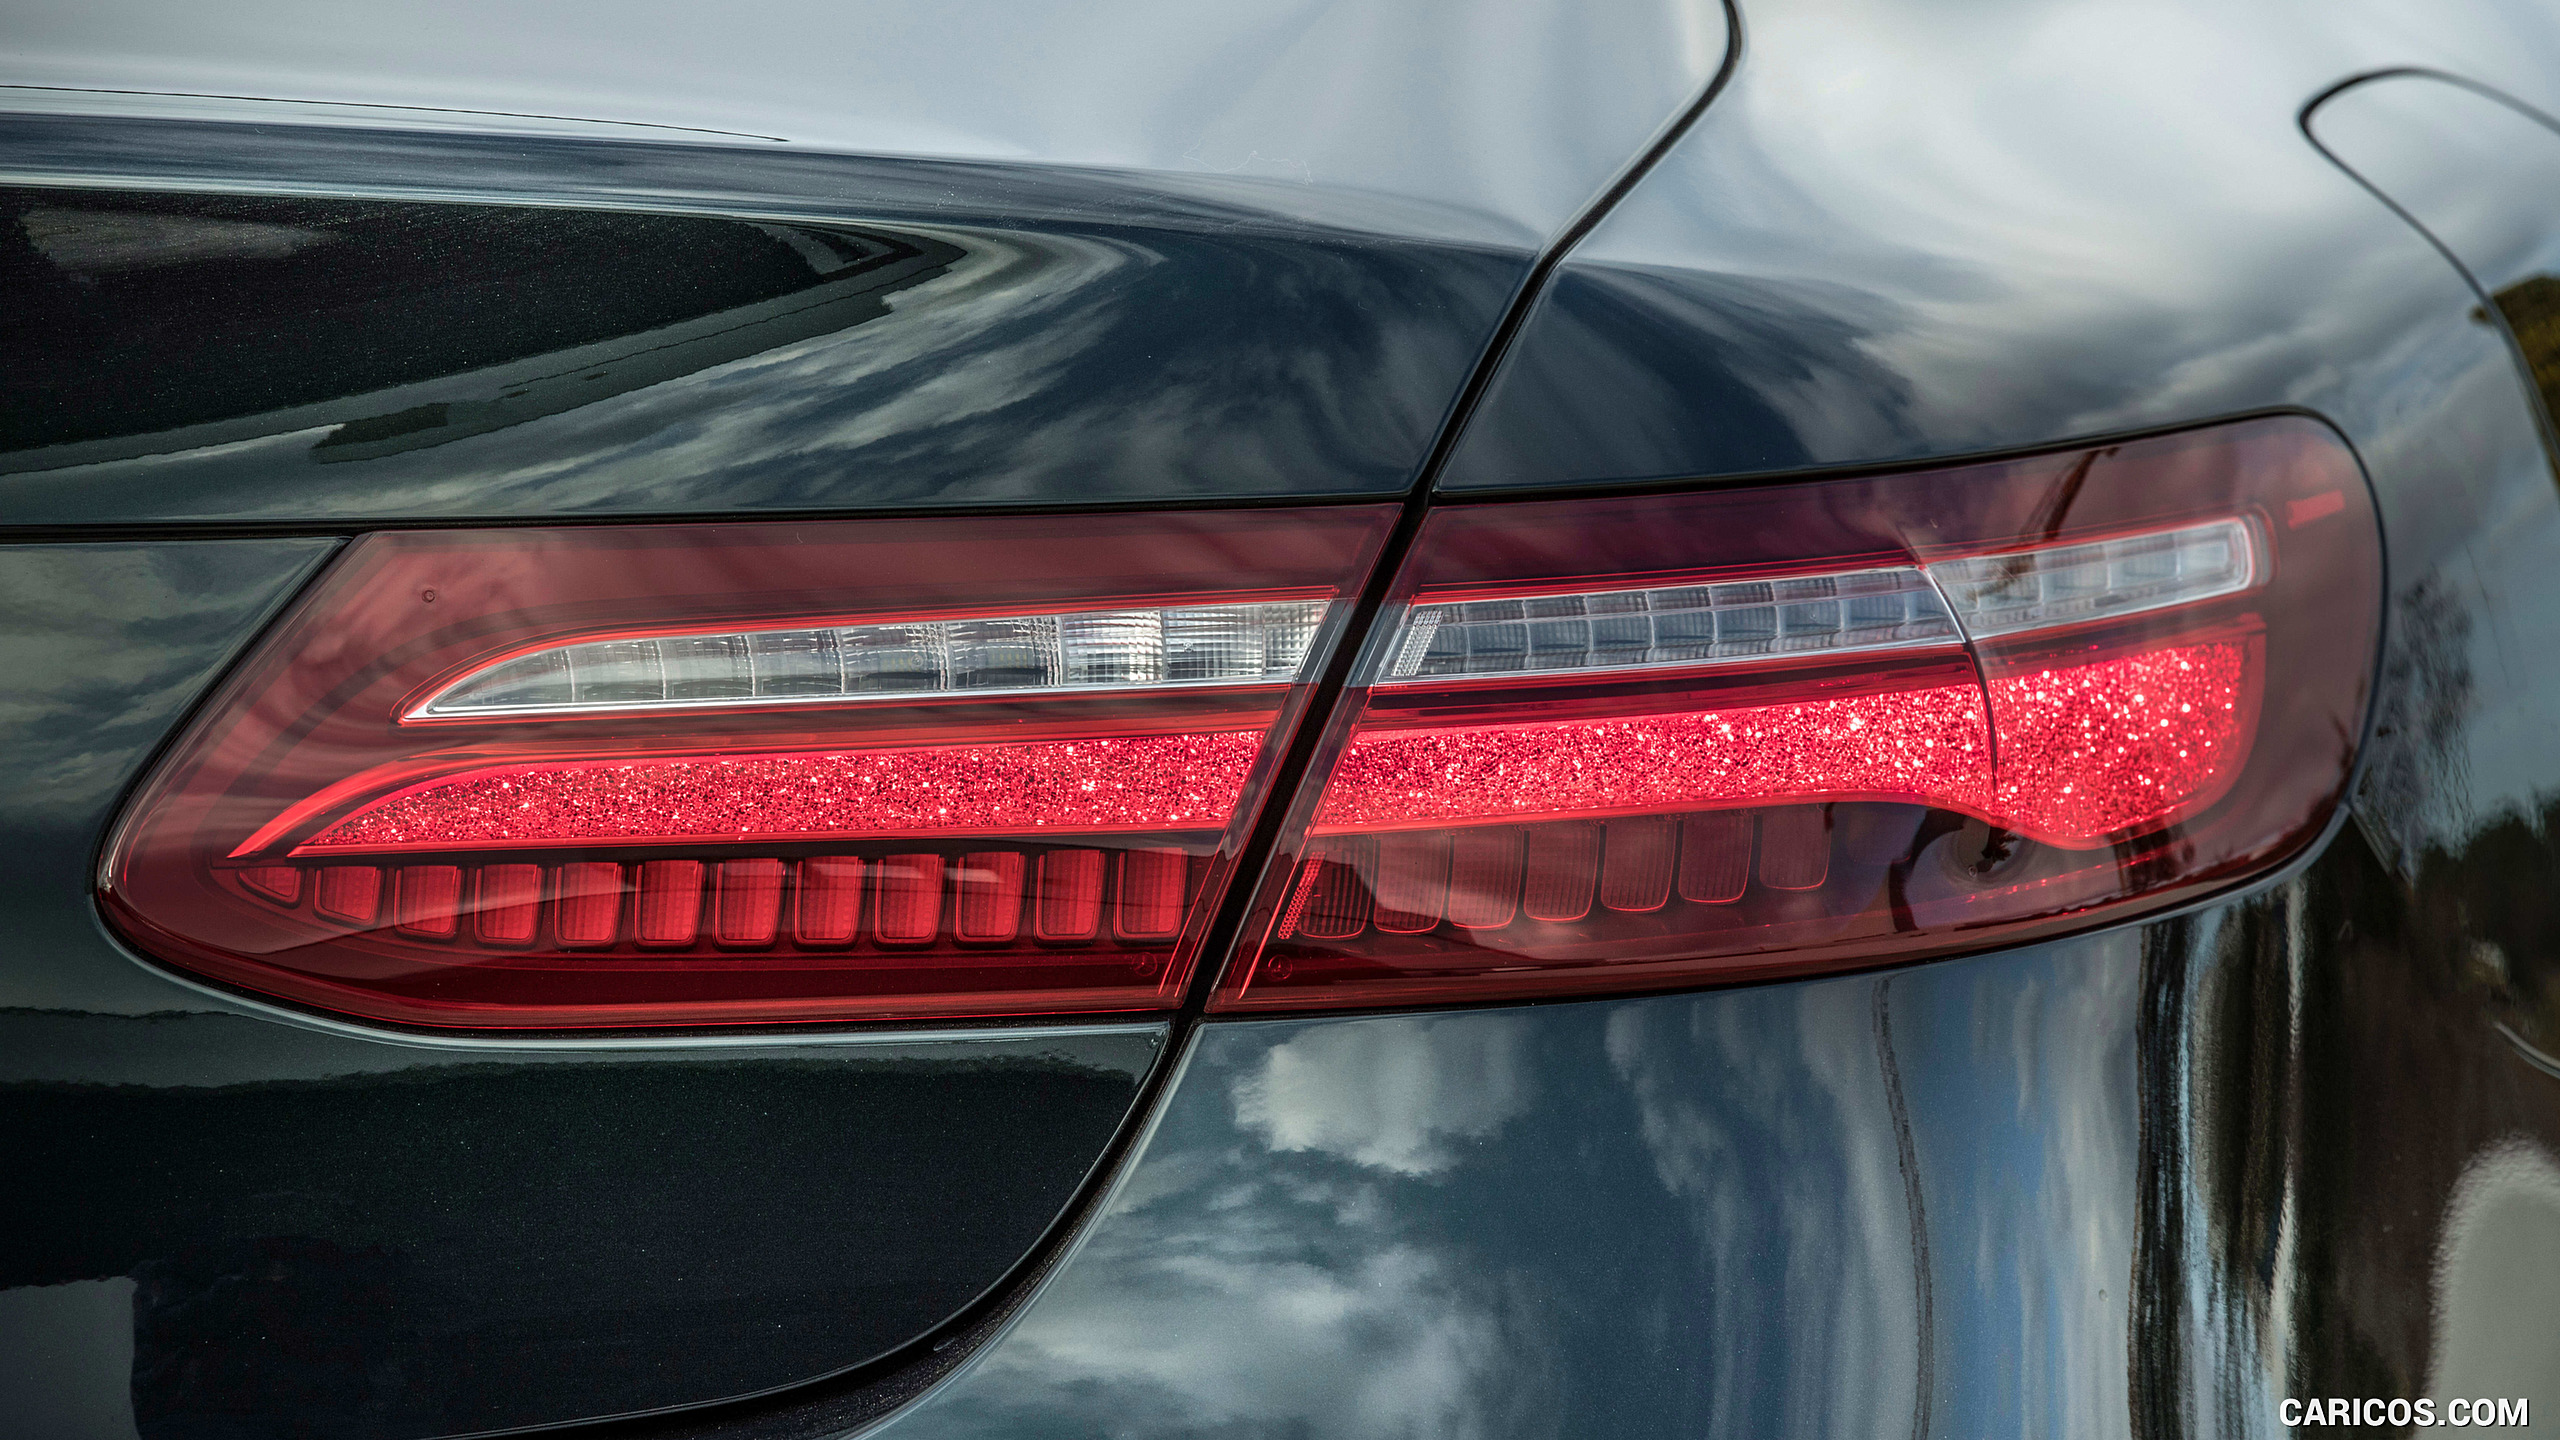 2018 Mercedes-Benz E400 Coupe 4MATIC - Tail Light, #210 of 365